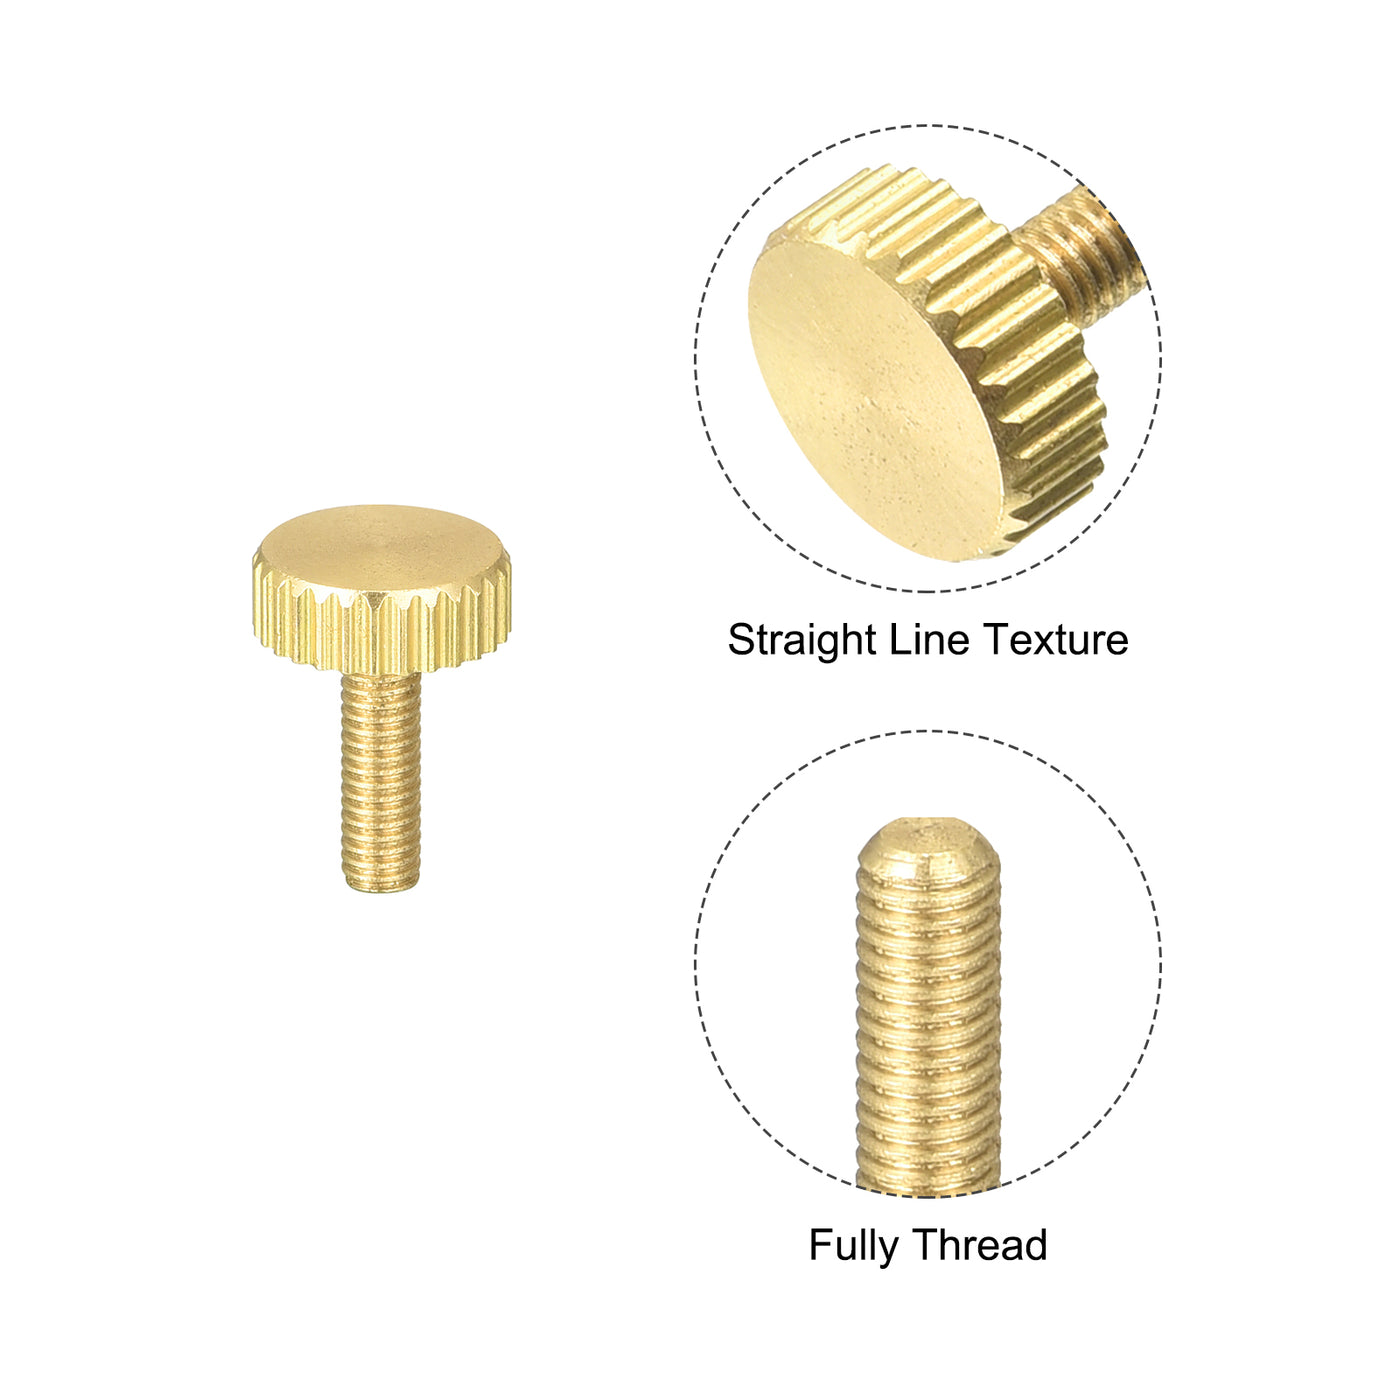 uxcell Uxcell Knurled Thumb Screws, M3x10mm Flat Brass Bolts Grip Knobs Fasteners for PC, Electronic, Mechanical 2Pcs